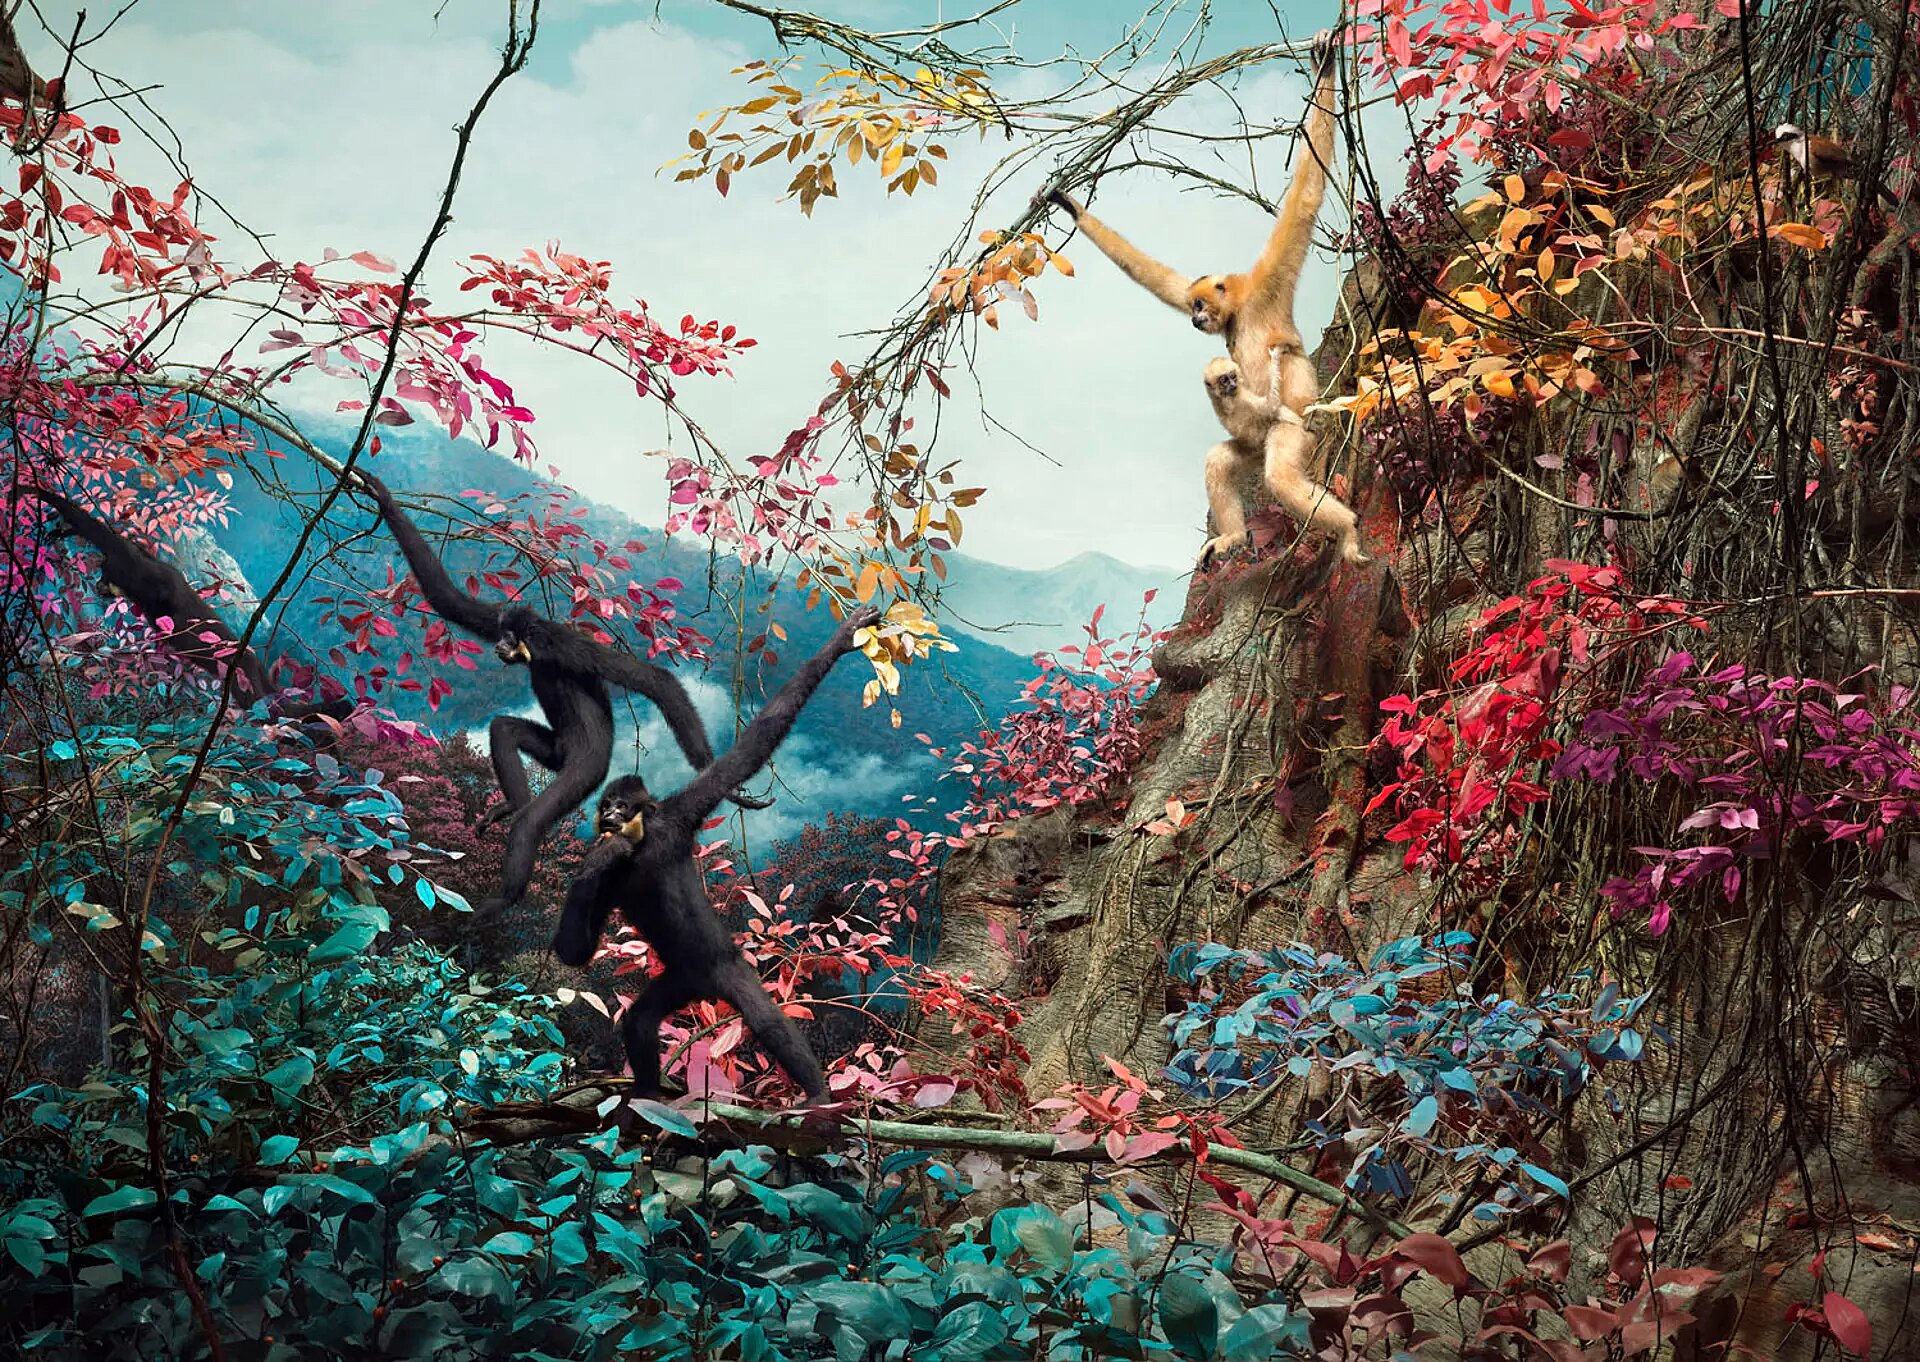 ‘In the evolutionary blink of an eye, humans have come to dominate the planet and our perception is that wildlife is something other, apart from humanity. The images in this series reflect this by using natural history specimens and dioramas, and adding layers and altering and exaggerating colours to highlight the artificial nature of what we are seeing.’ Jim Naughten is an artist exploring historical and natural history subject matter using photography, stereoscopy and painting.